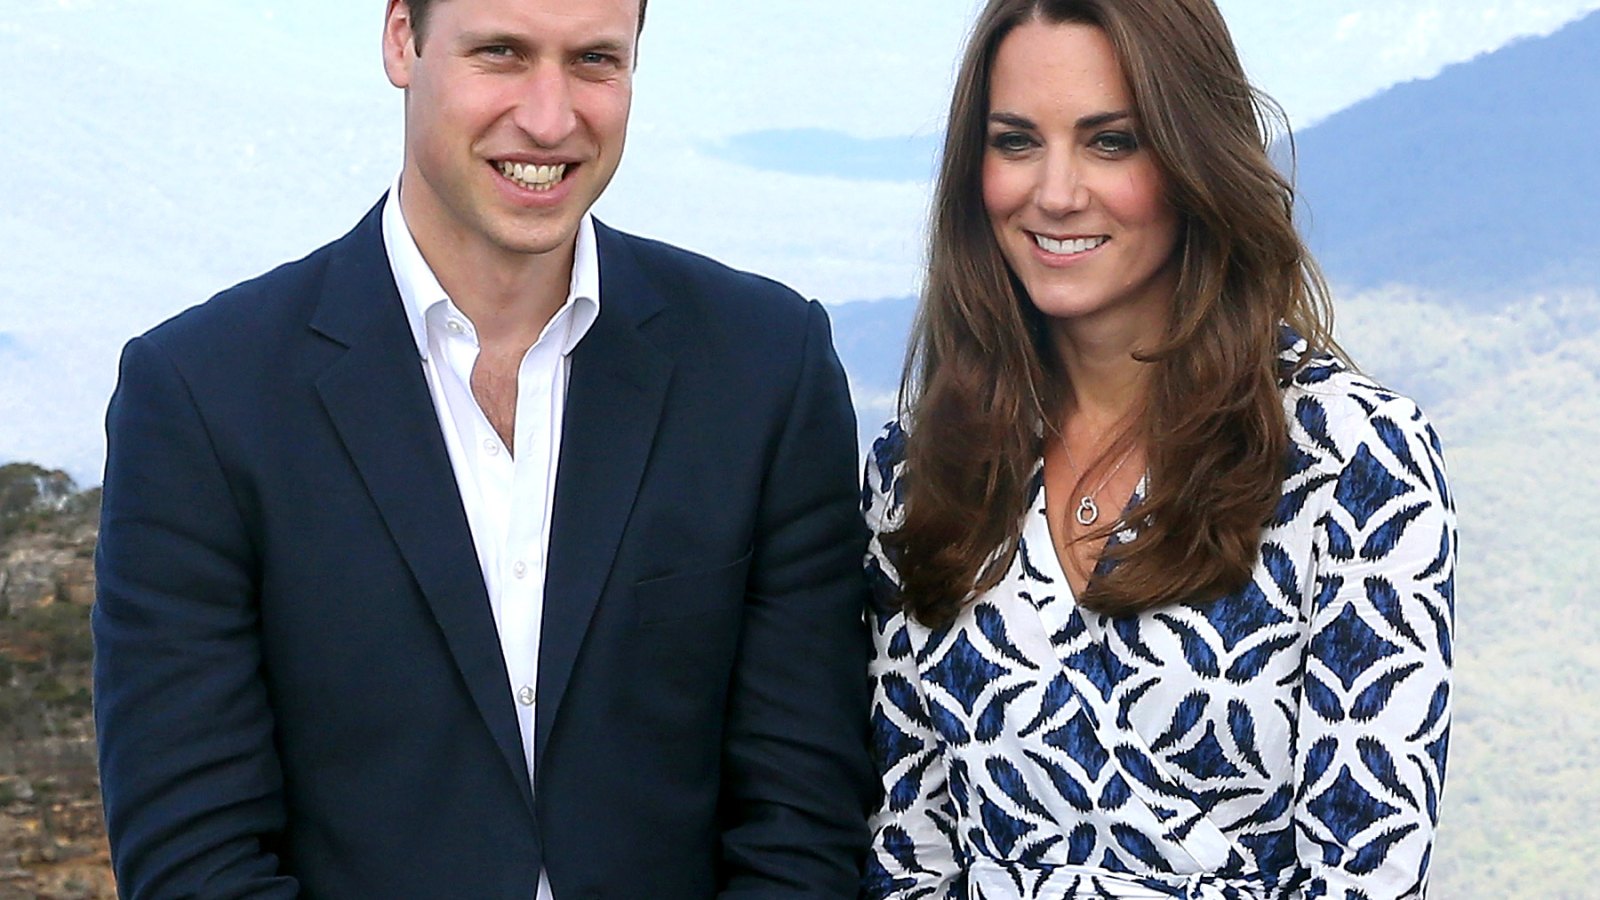 Prince William and Kate Middleton pose for a photograph at Echo Point